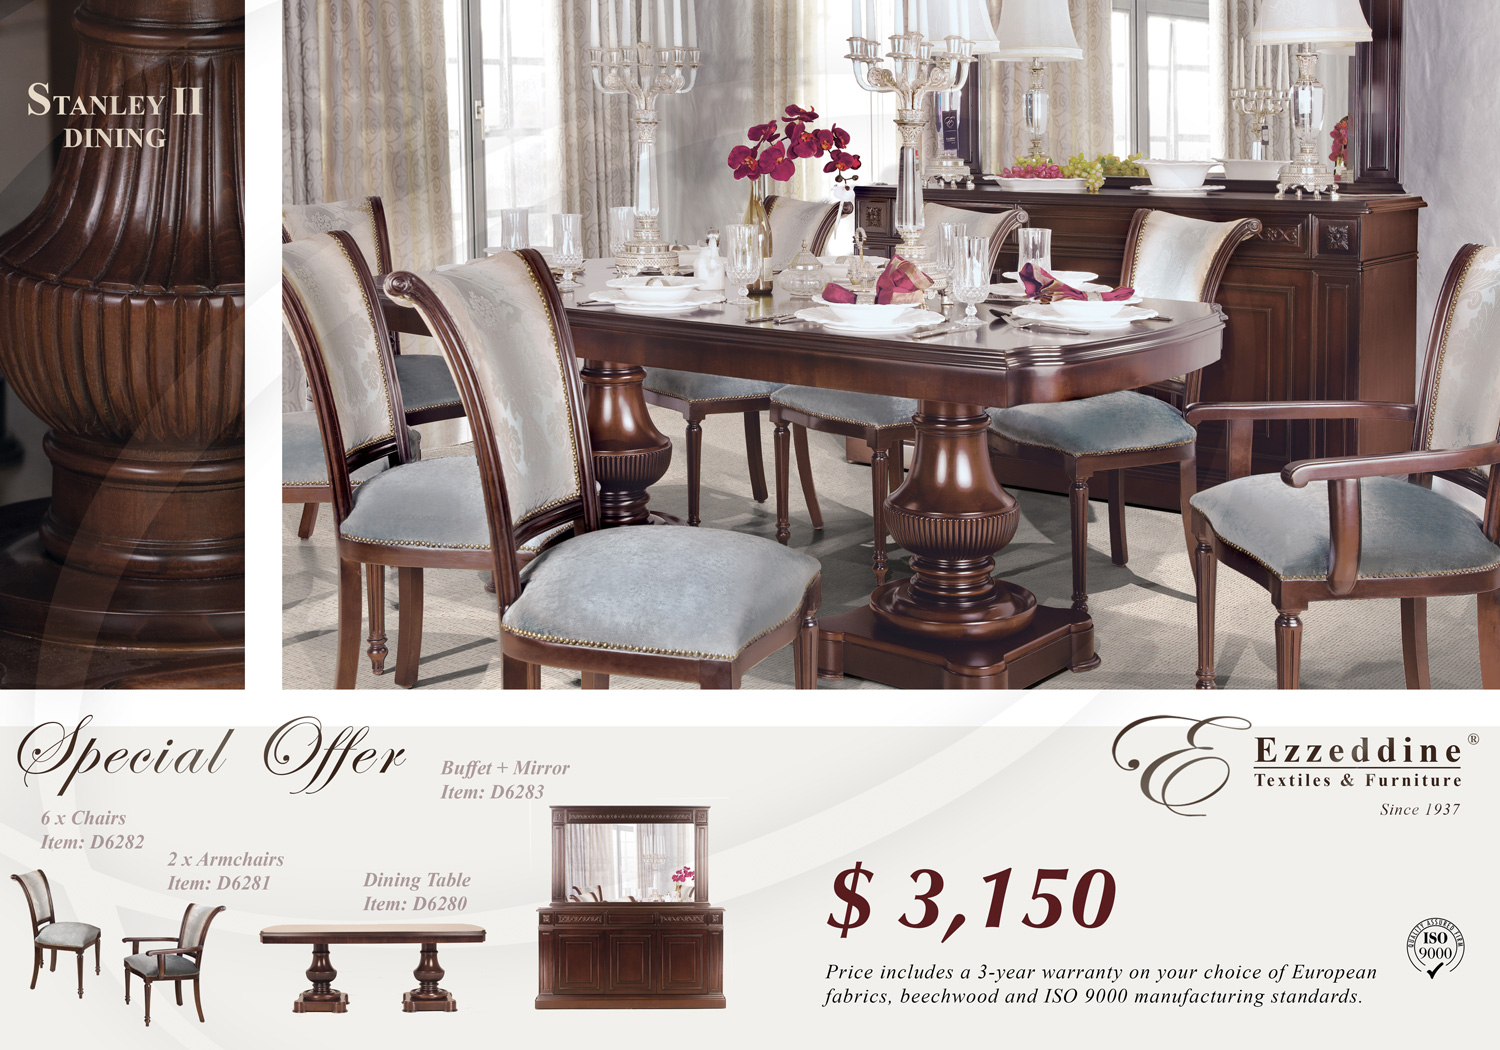 Limited Time Offer - Dining Room - Only $3,150 - 10 Piece Set Dining Room